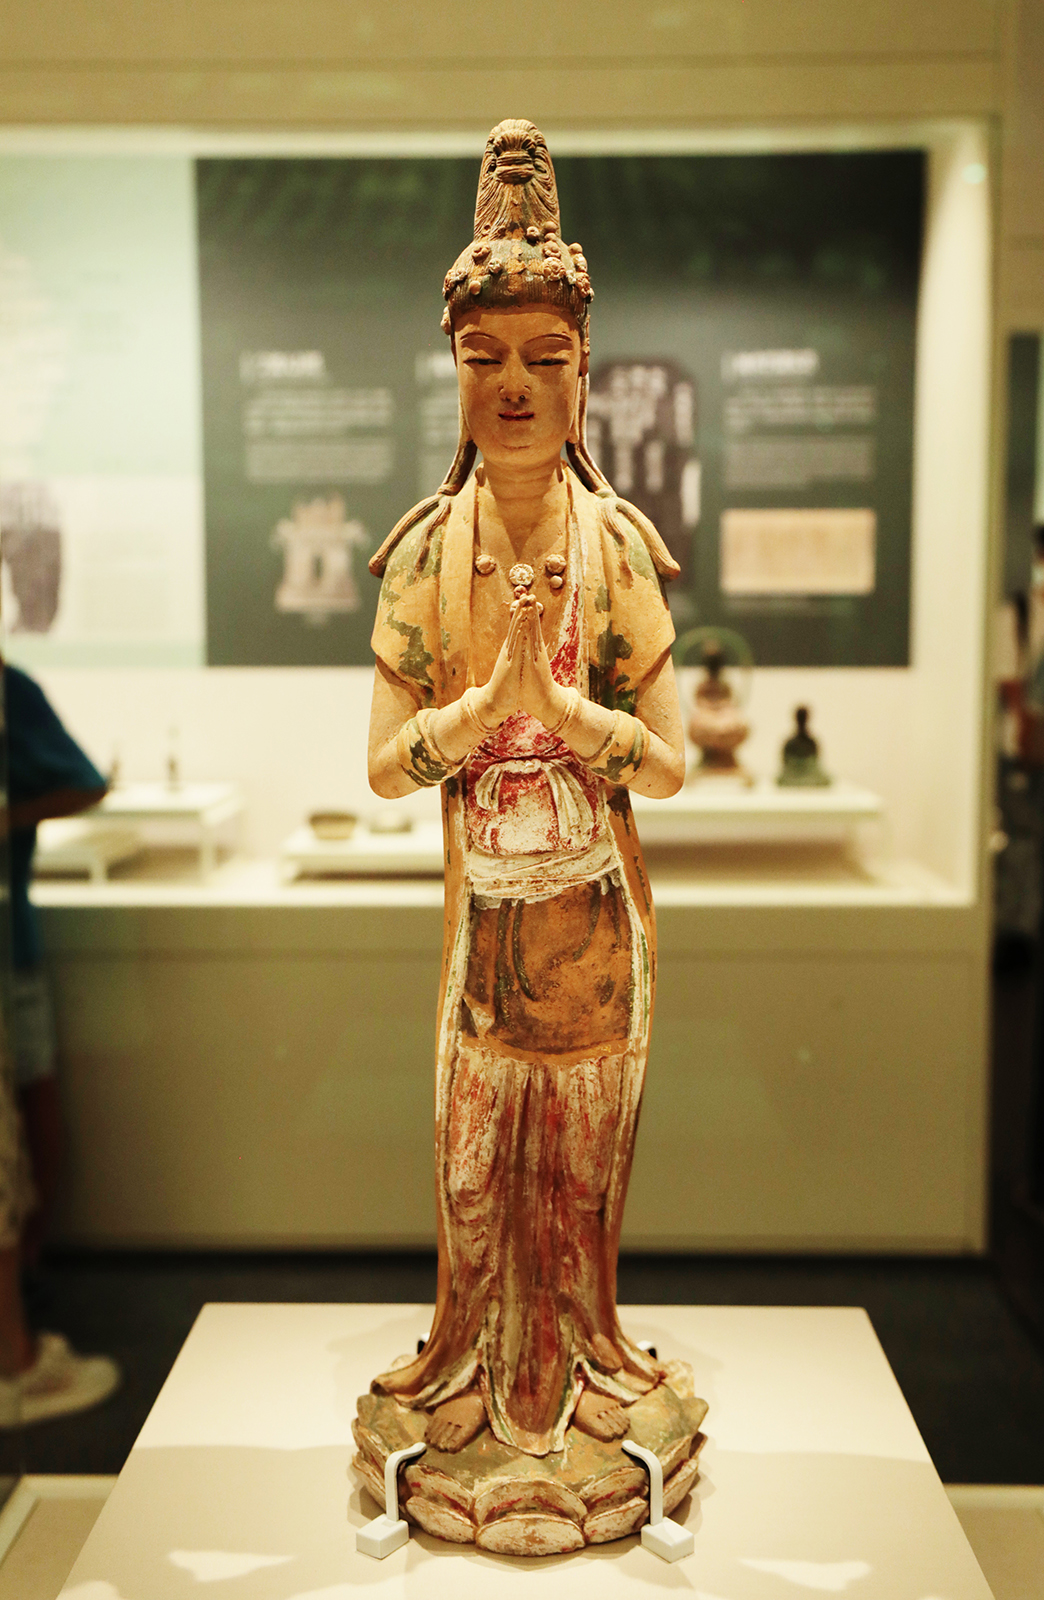 A colored clay statue of a standing Bodhisattva dating back to the Northern Song Dynasty (960-1127) is on display at the Zhijiang Branch of the Zhejiang Provincial Museum in Hangzhou, Zhejiang Province. /CGTN